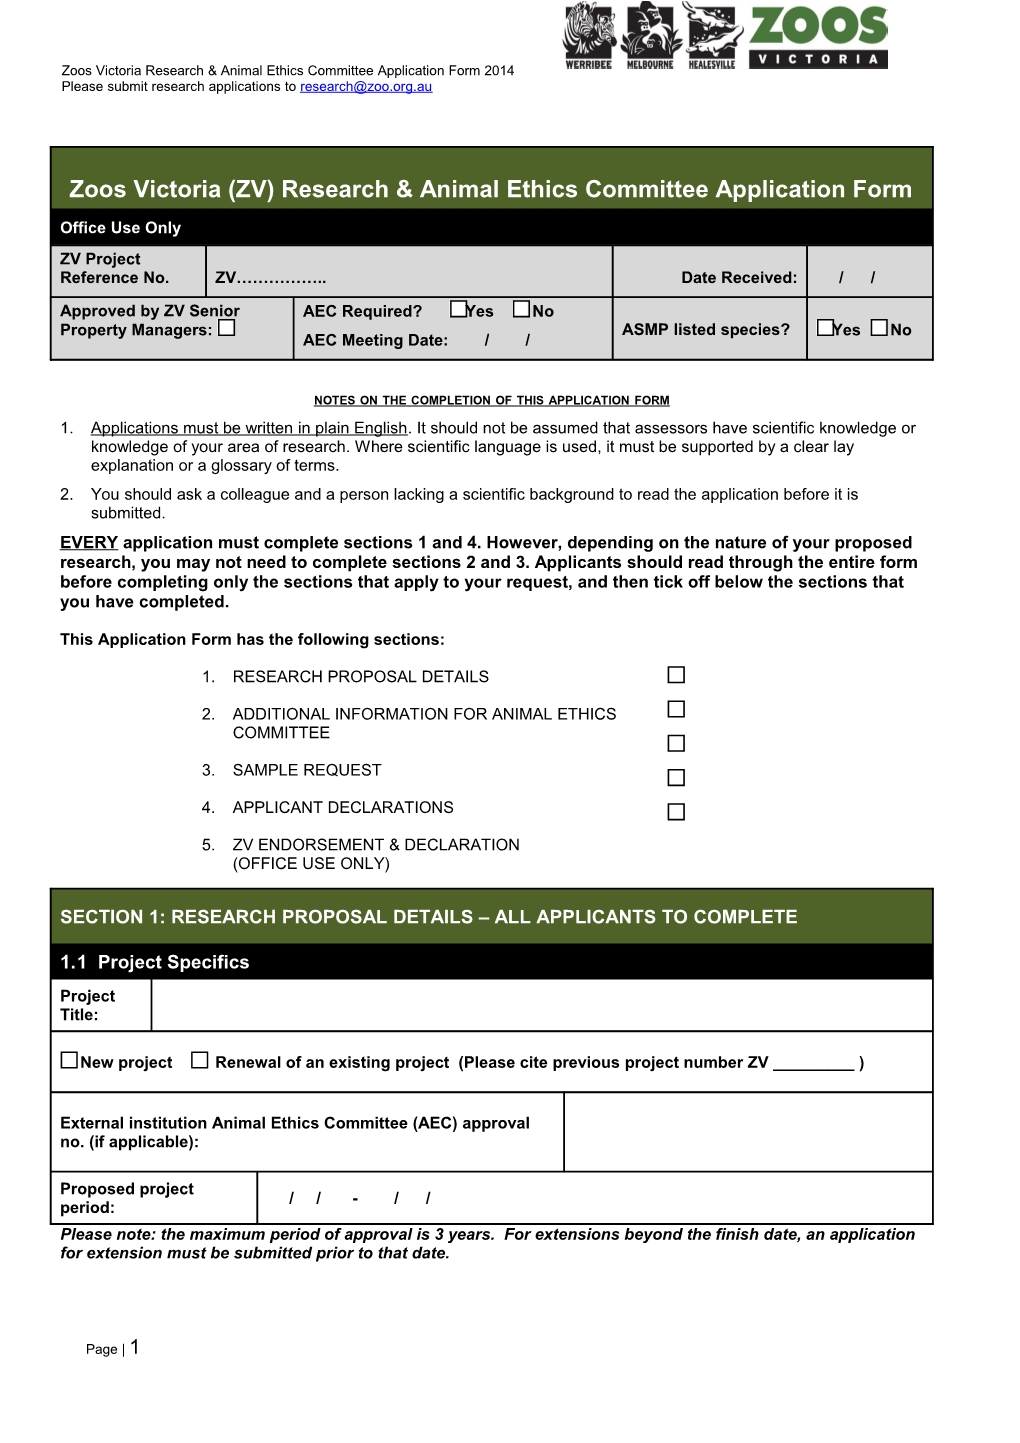 Zoos Victoria Research & Animal Ethics Committee Application Form